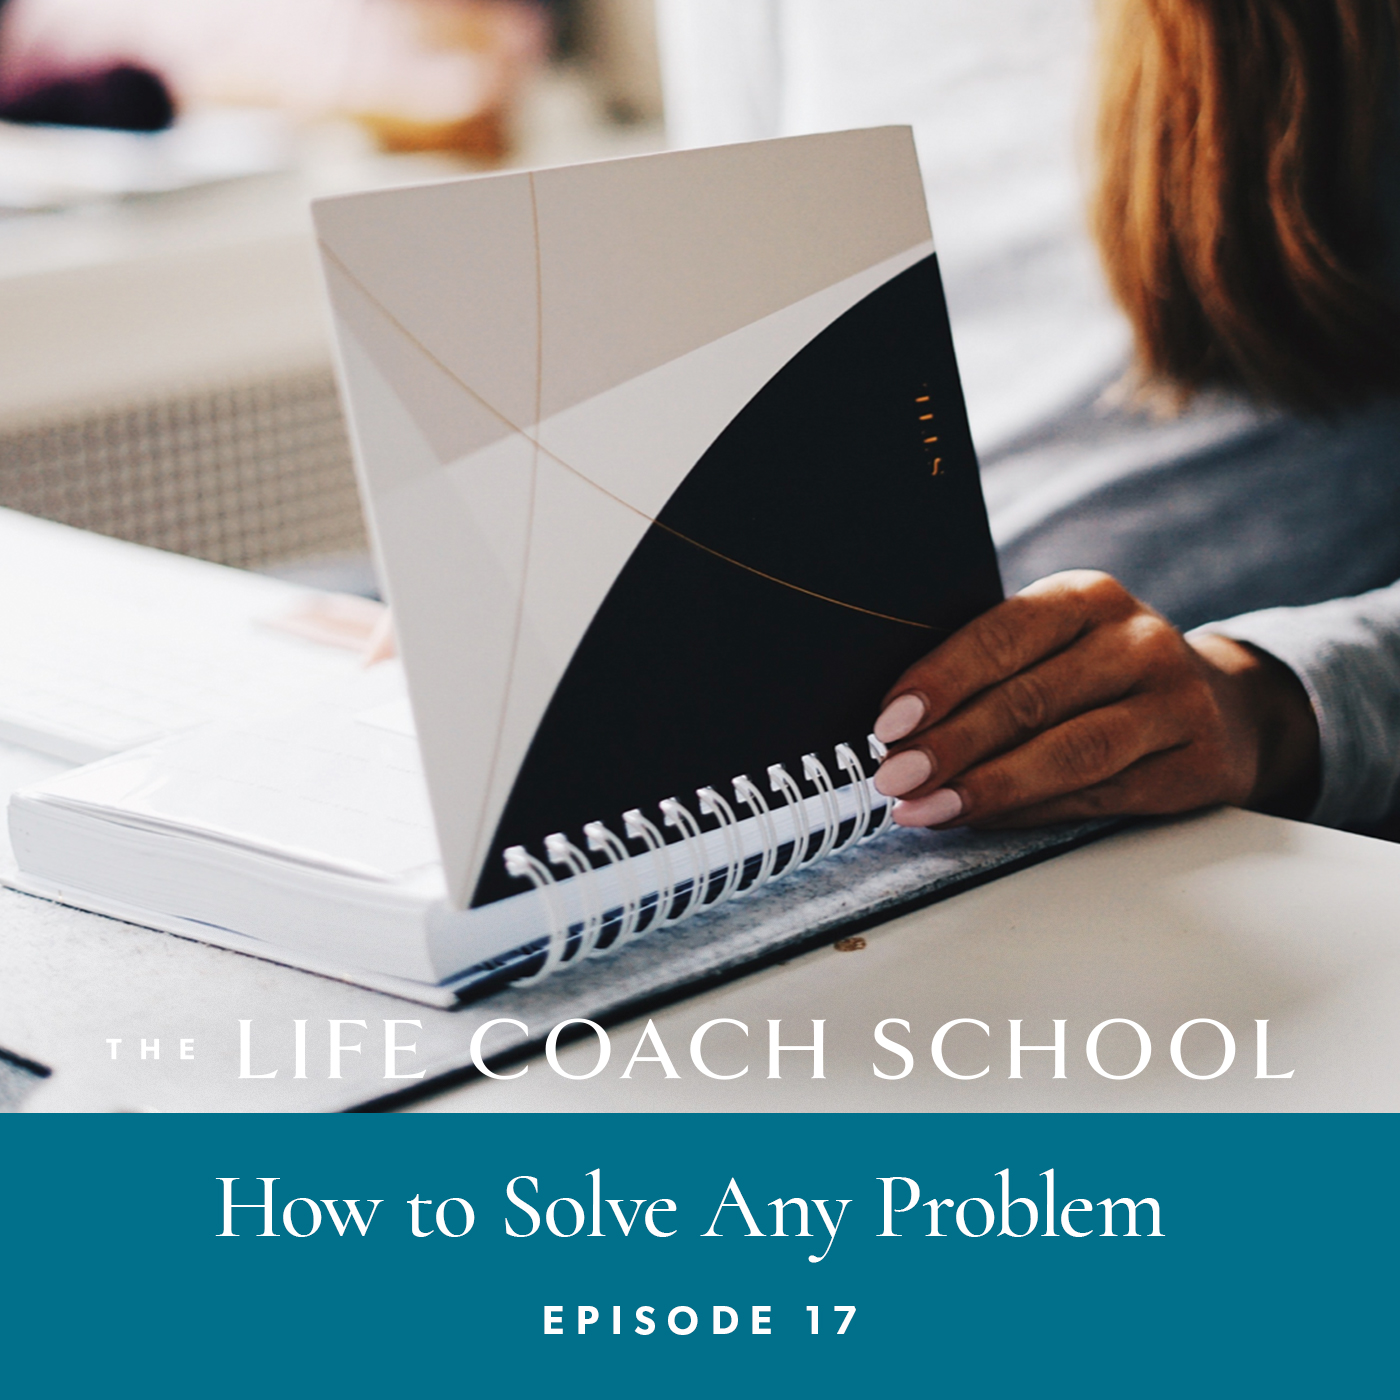 The Life Coach School Podcast with Brooke Castillo | Episode 17 | How to Solve Any Problem